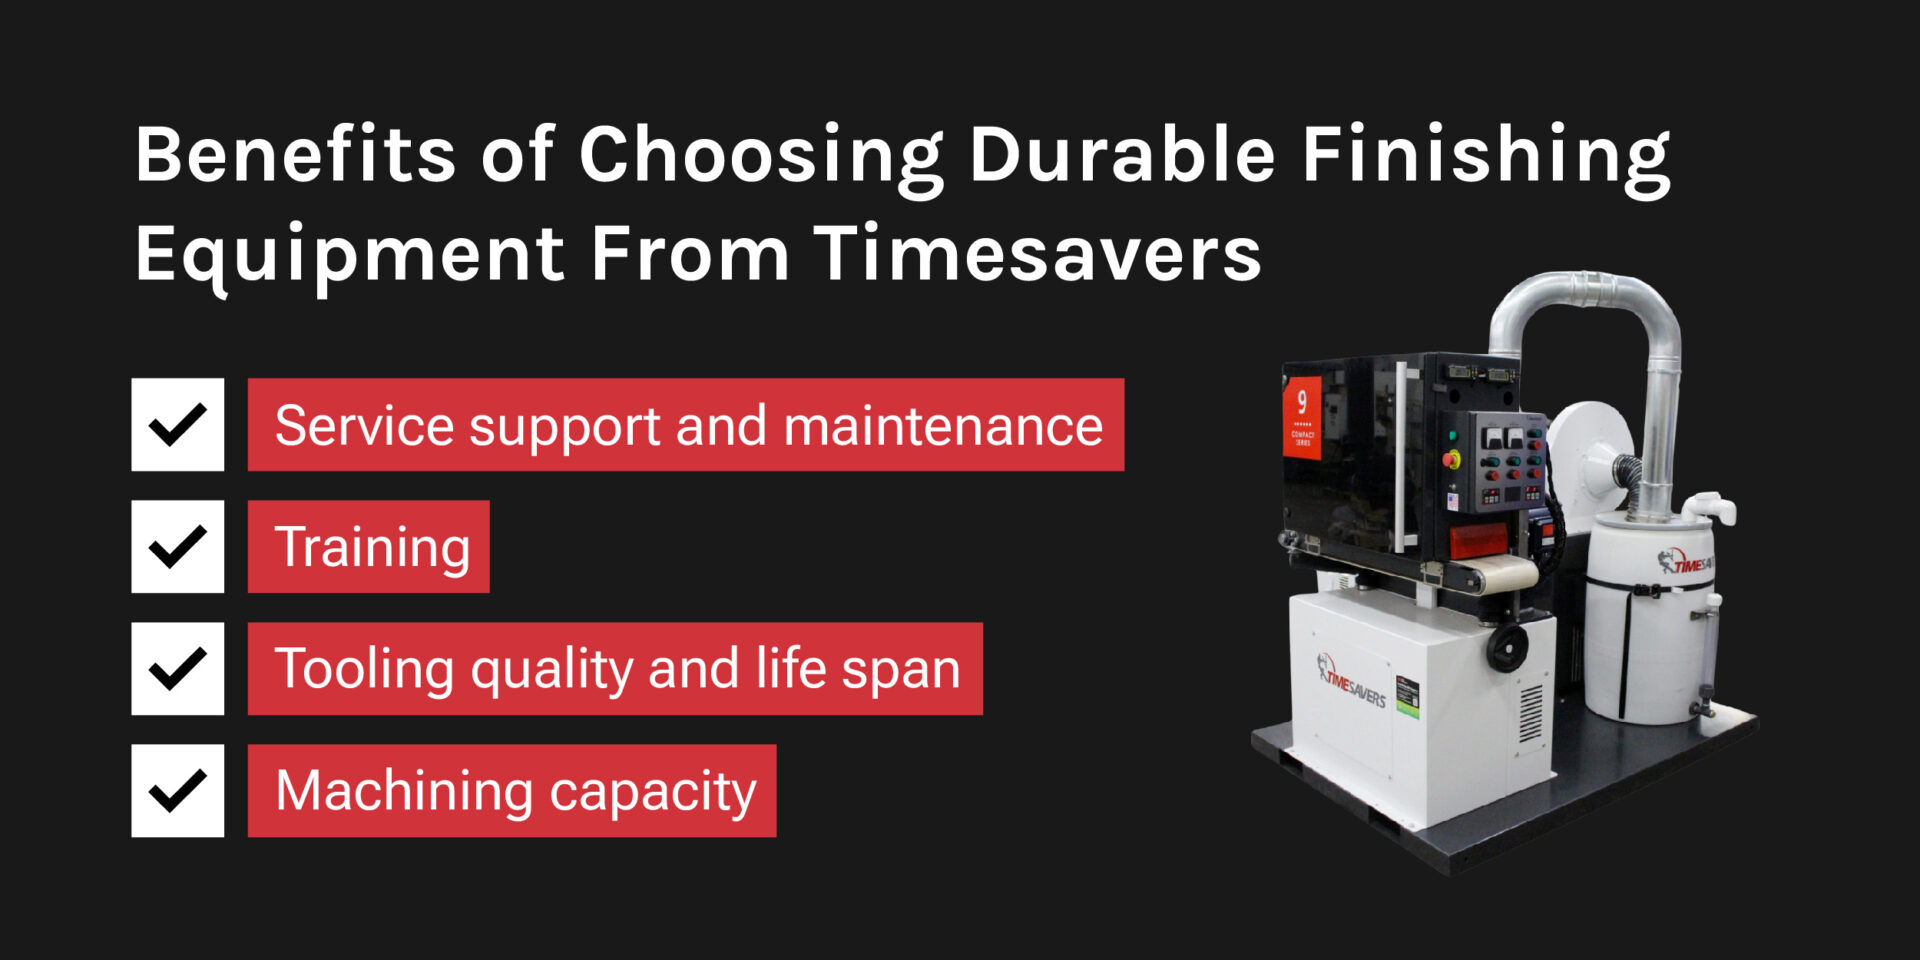 3D model of a finishing system from Timesavers